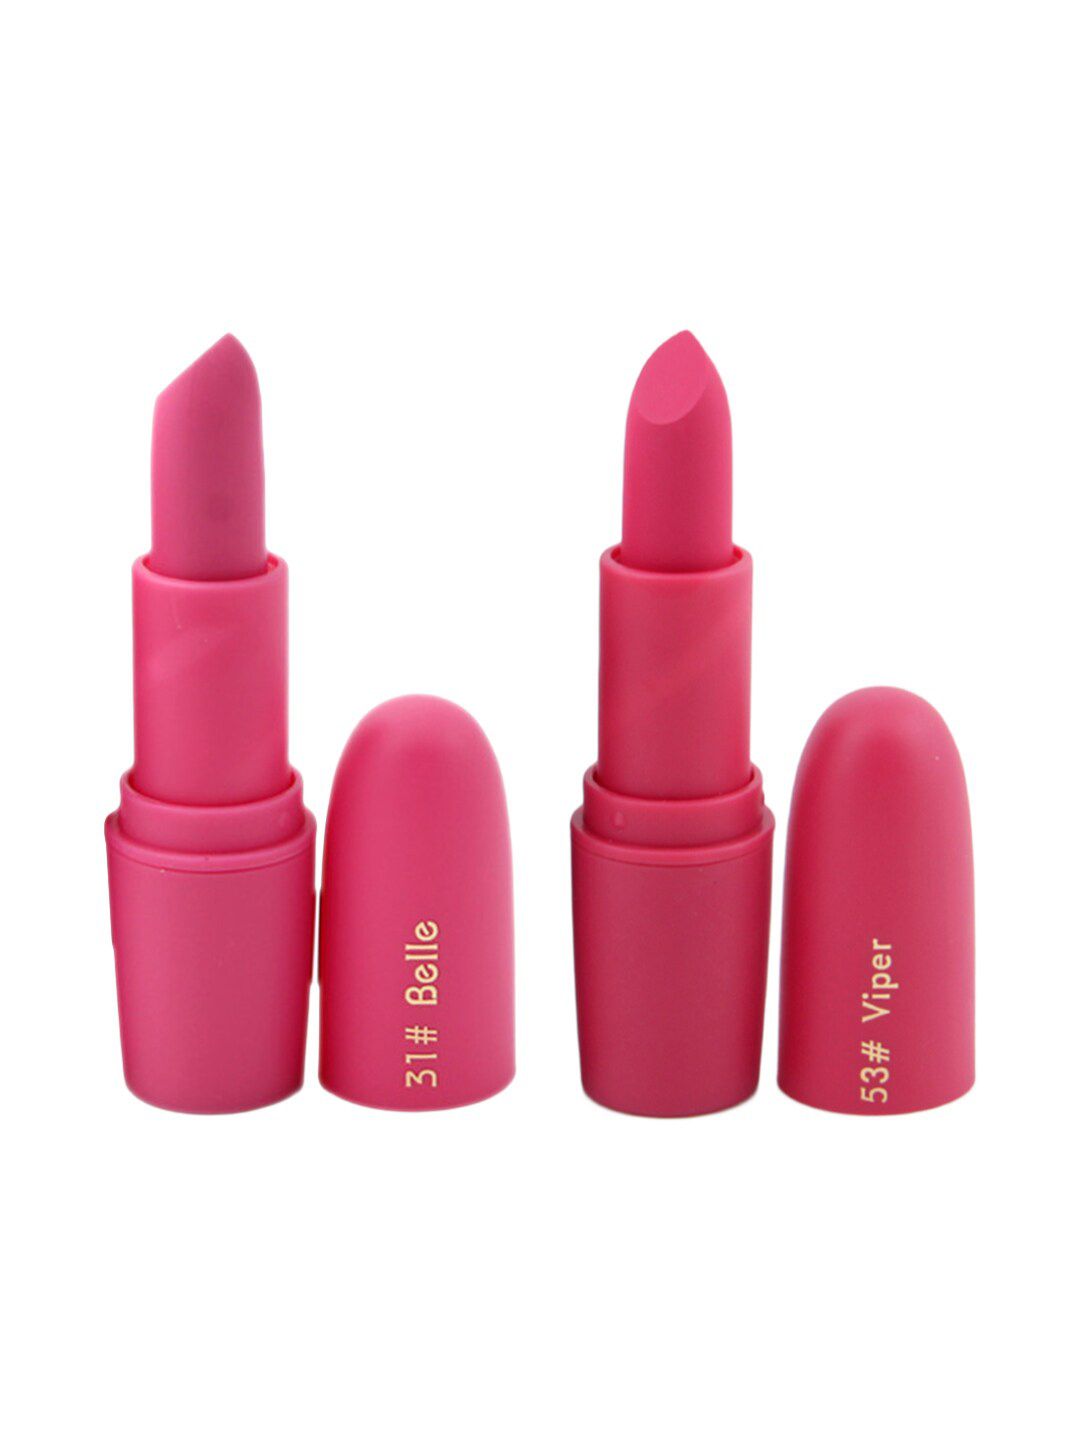 MISS ROSE Professional Make-Up Set of 2 Matte Creamy Lipsticks - Belle 31 & Viper 53 Price in India